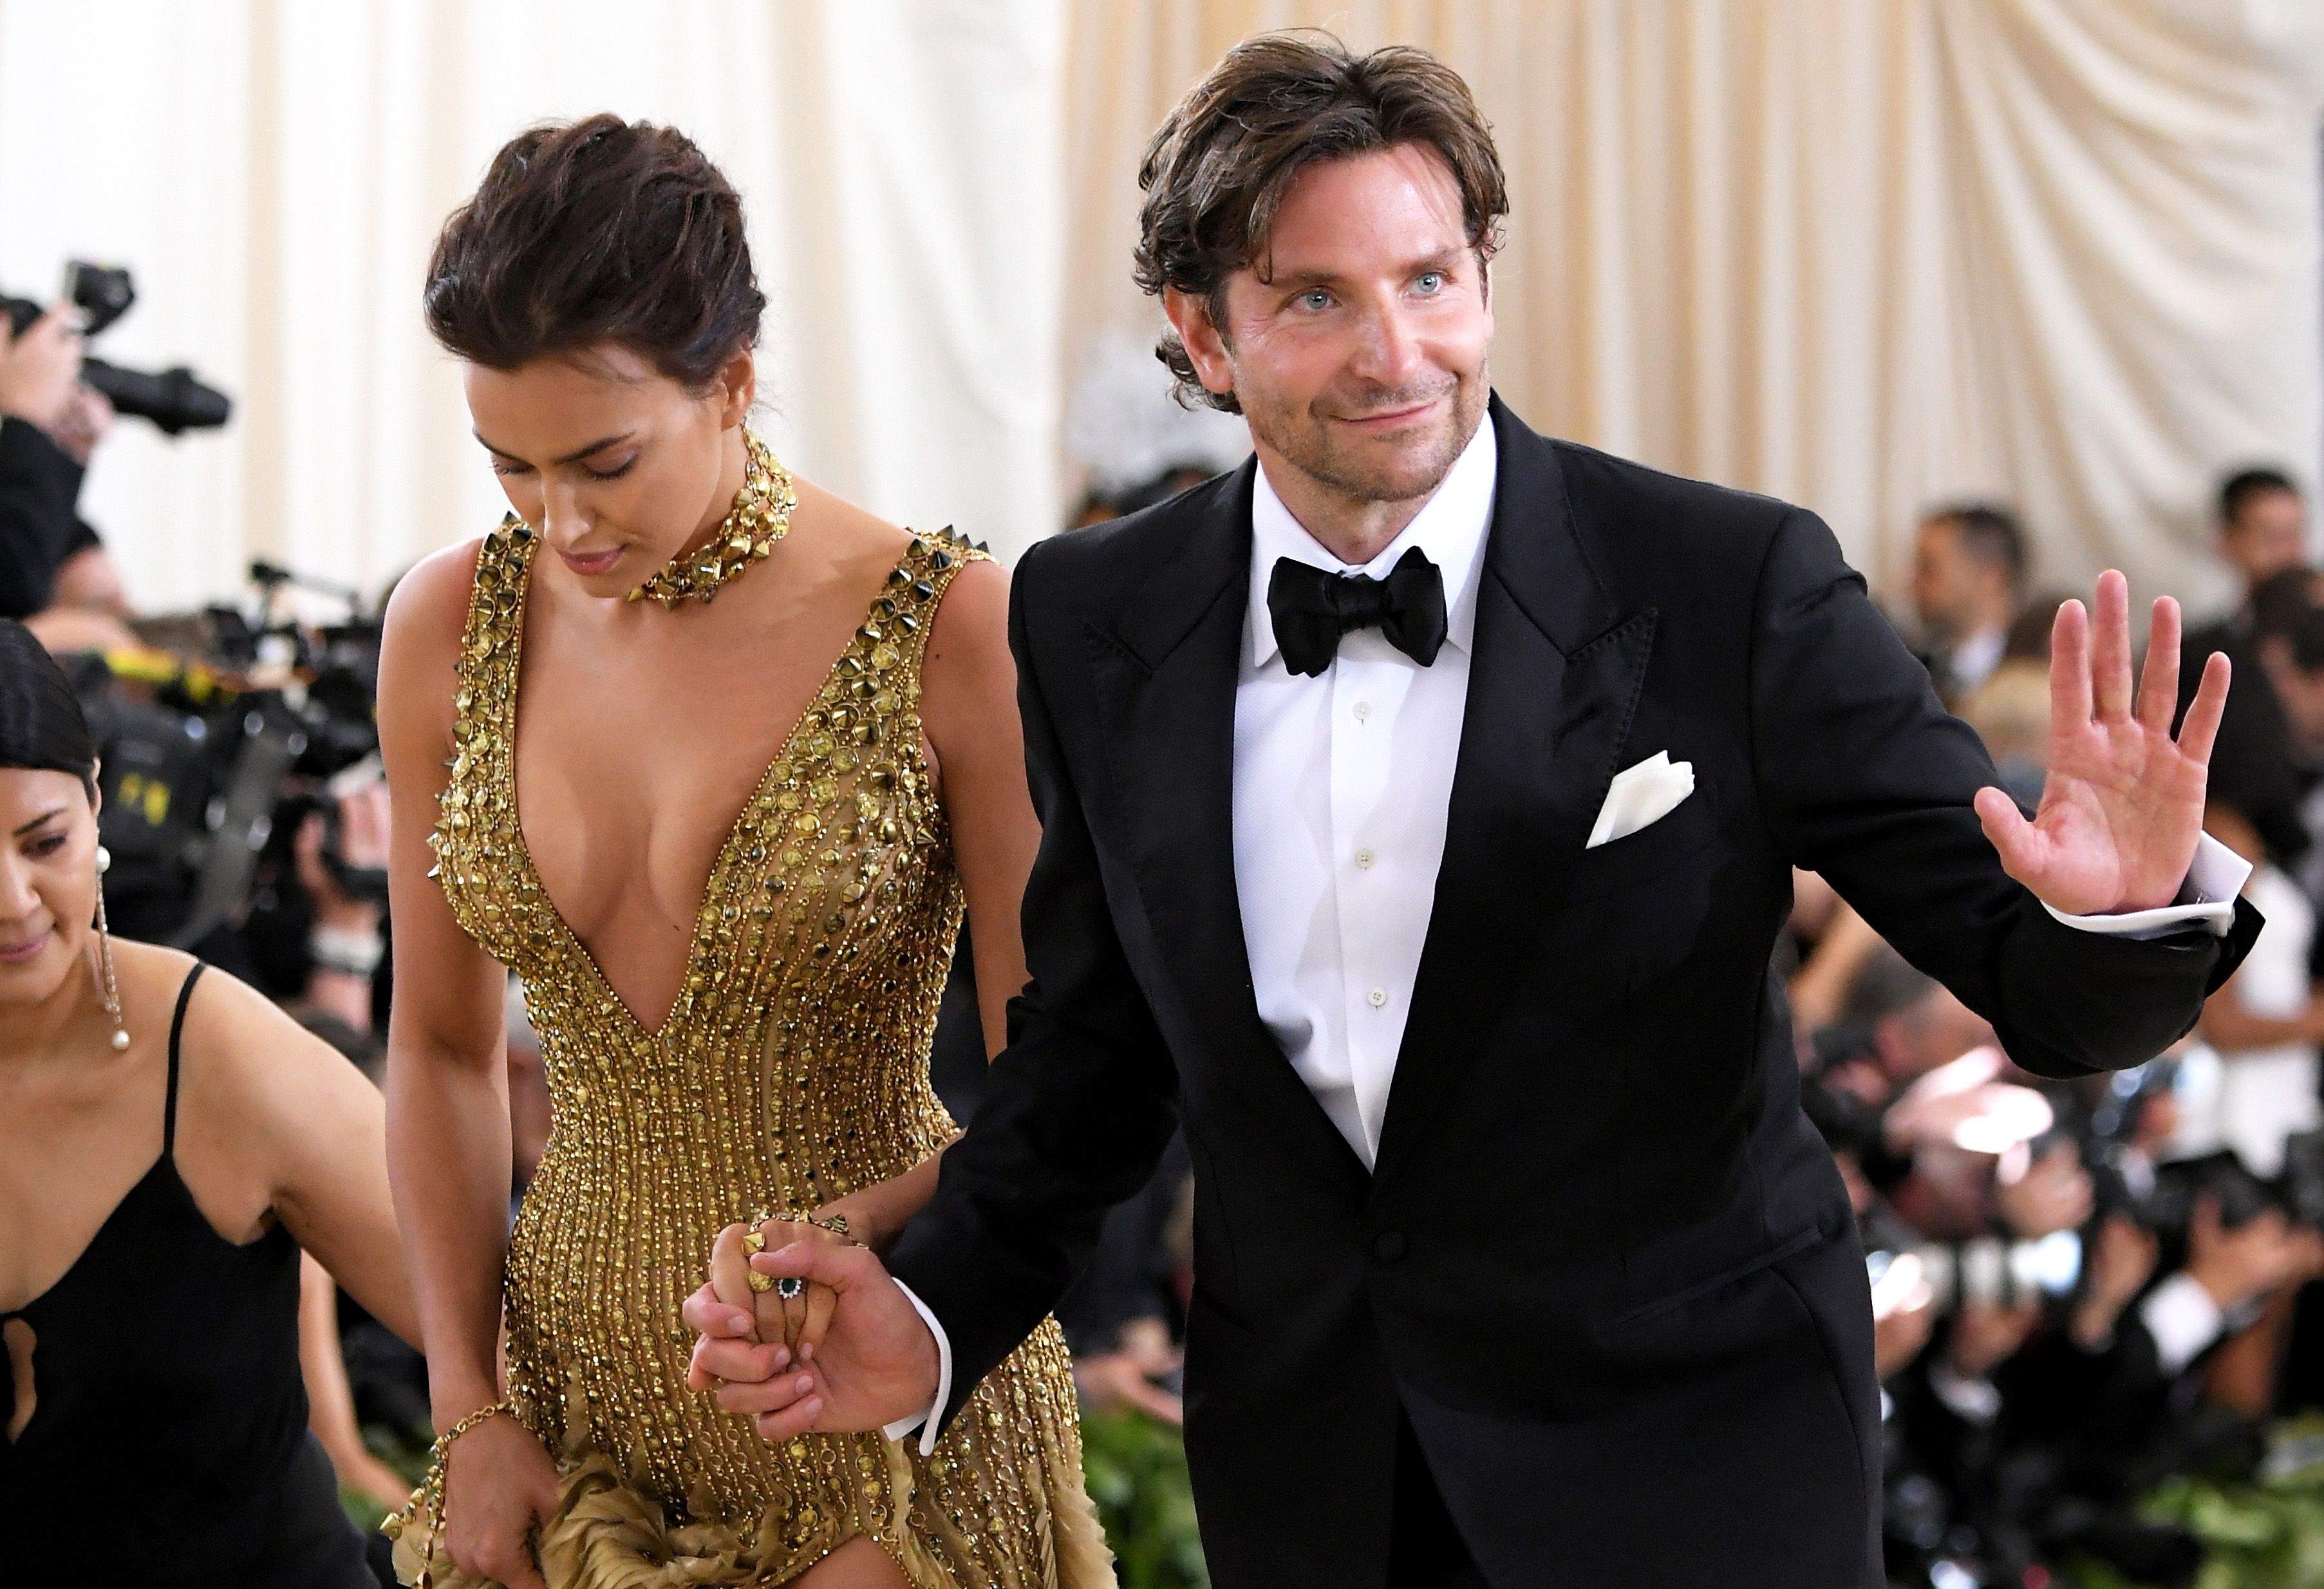 Married who cooper is to bradley Bradley Cooper: